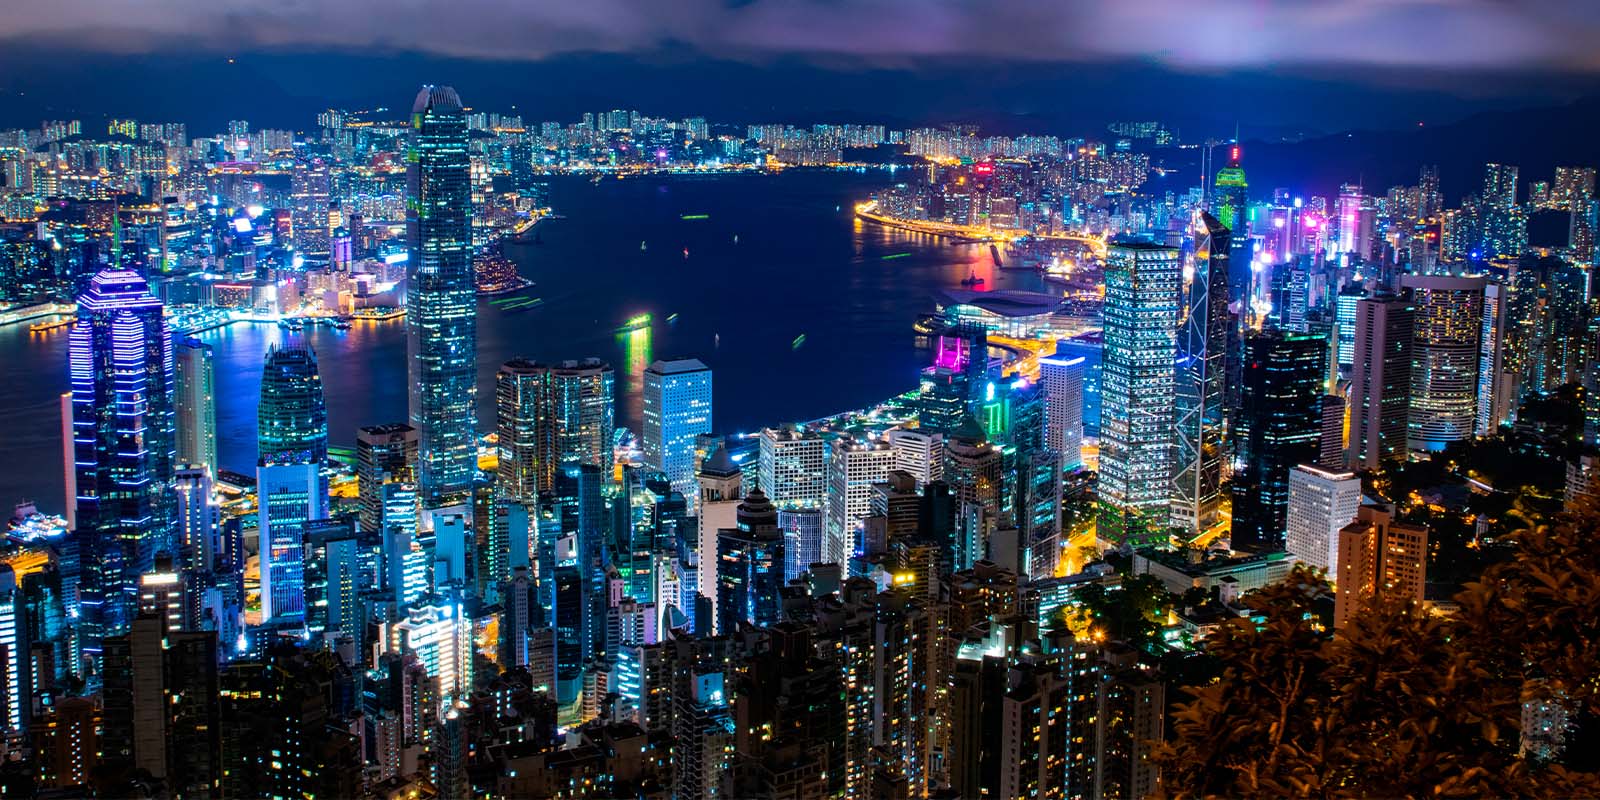 The Hong Kong economy is characterized by low tax rates, free trade, and less government interference.